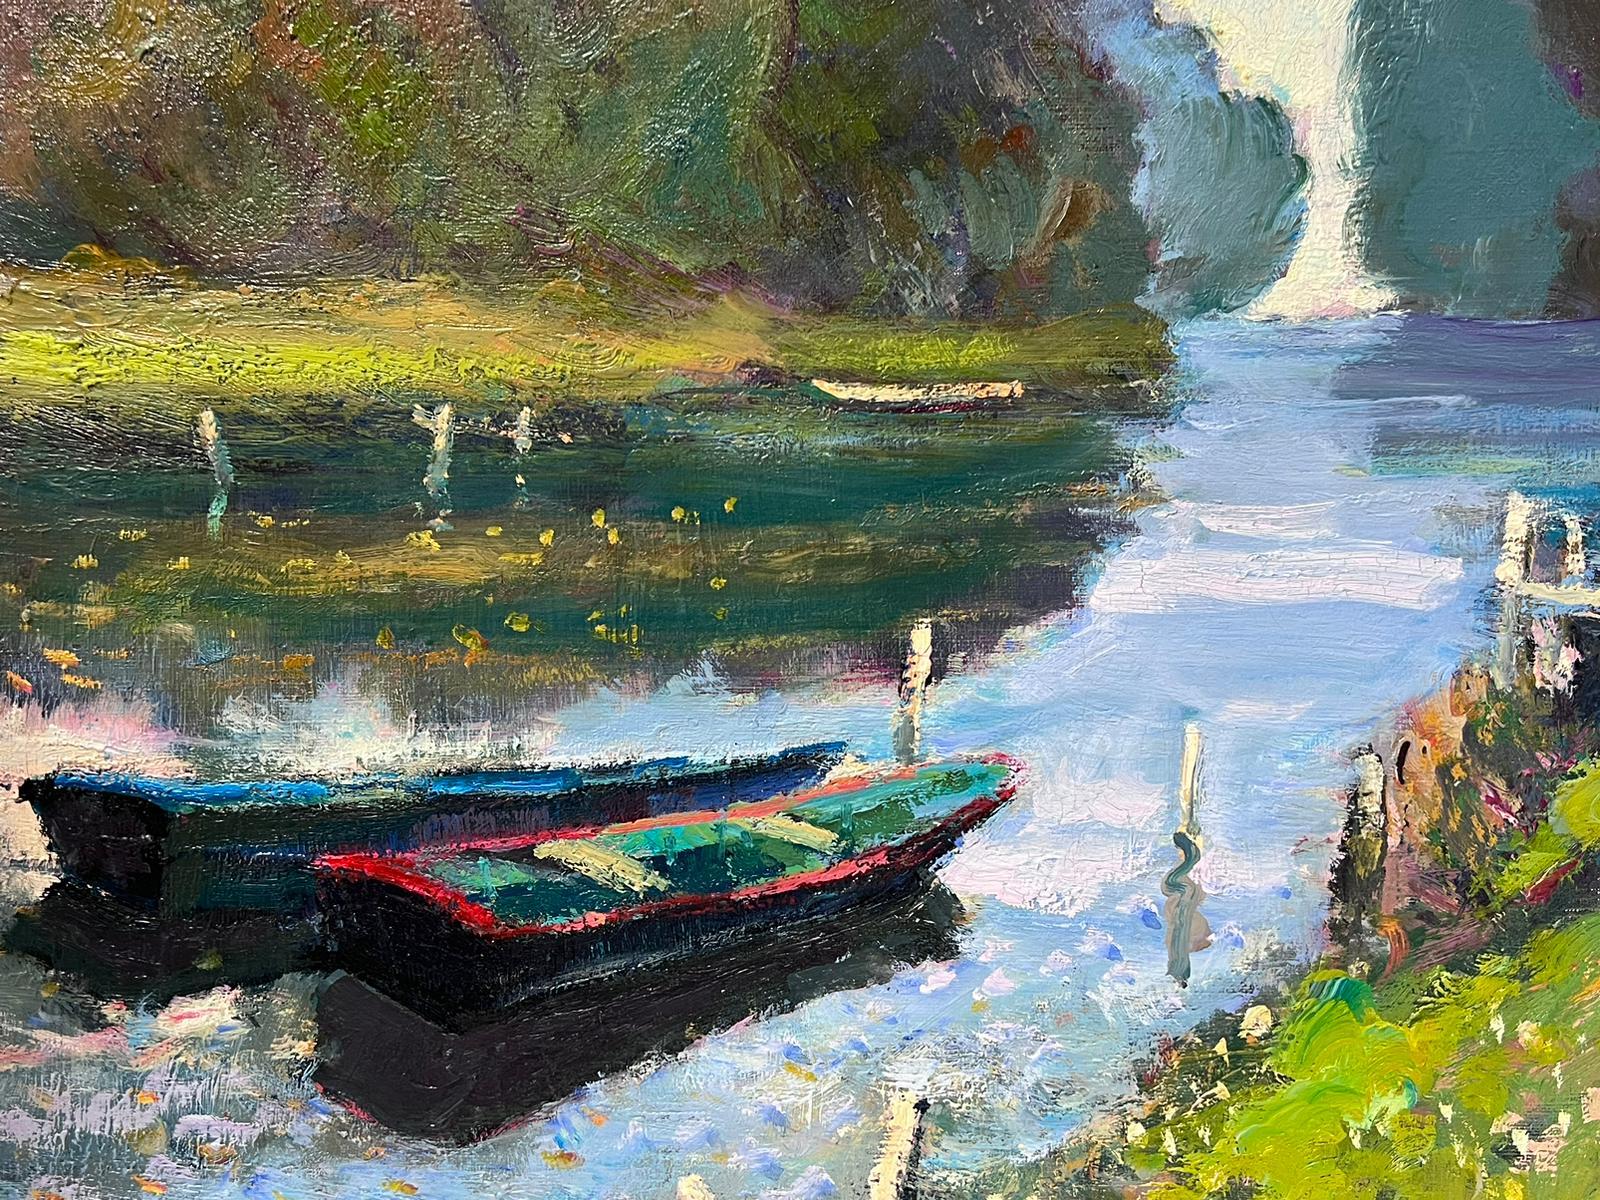 Artist/ School: Guy Benard (French b.1928) signed lower corner. Painter from Rouen, Normandy, exhibited throughout France. 

Title: Bords de l'Eure (*see notes below on the location)

Medium:  signed oil on canvas, unframed and inscribed